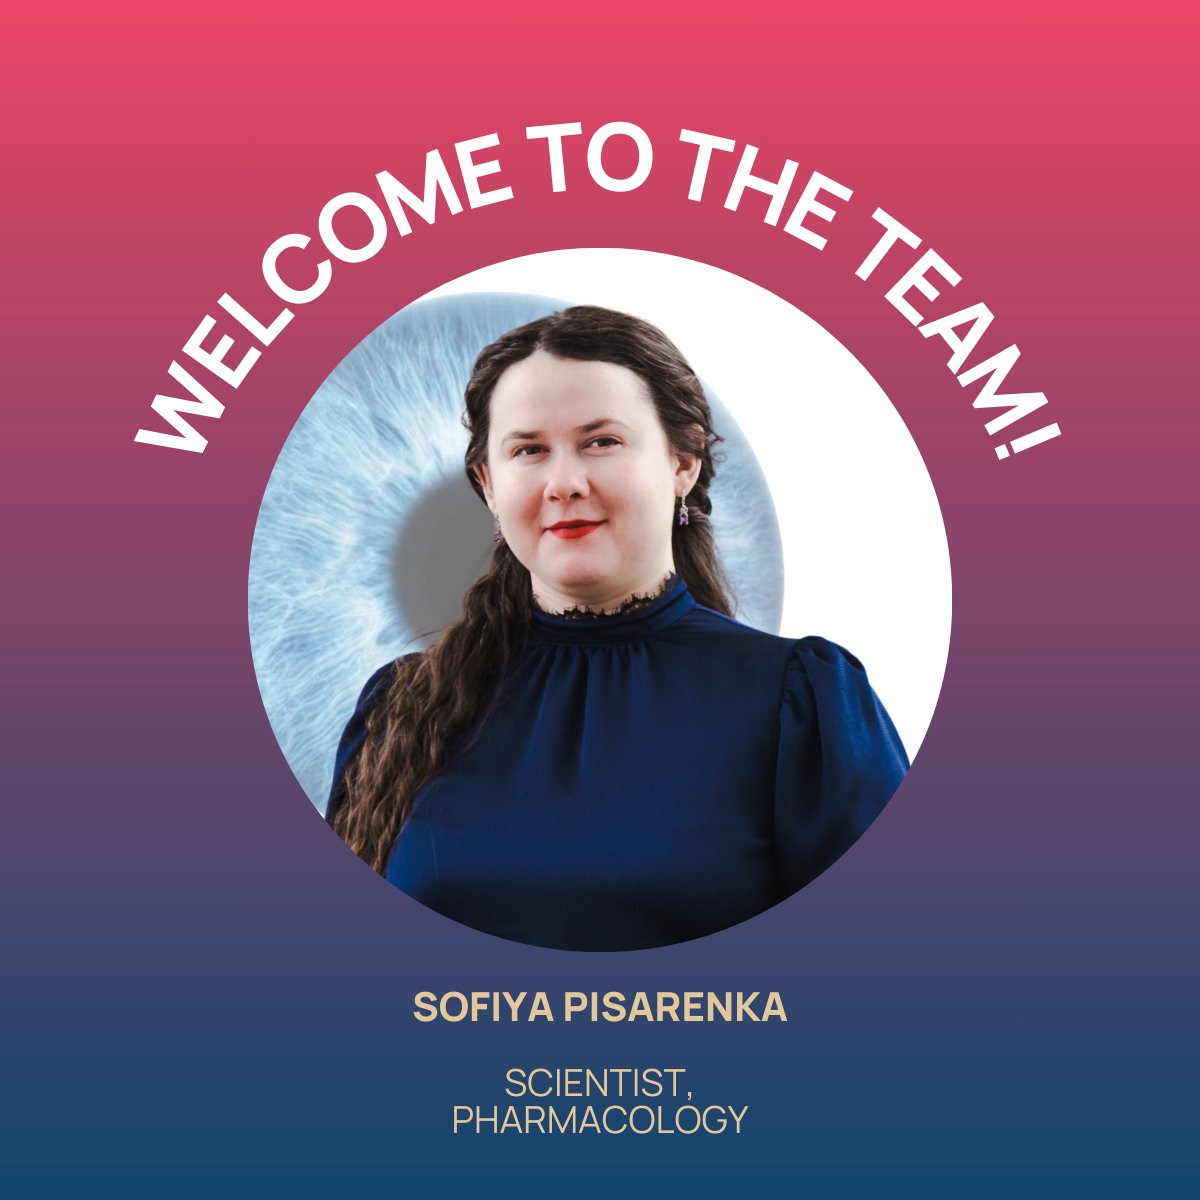 We welcome Sofiya to the team as our Scientist, Pharmacology. 🎉 

#WelcomeAboard #GeneTherapy #ophthalmology #ComplementBiology #team #JobOpening #JoinUs